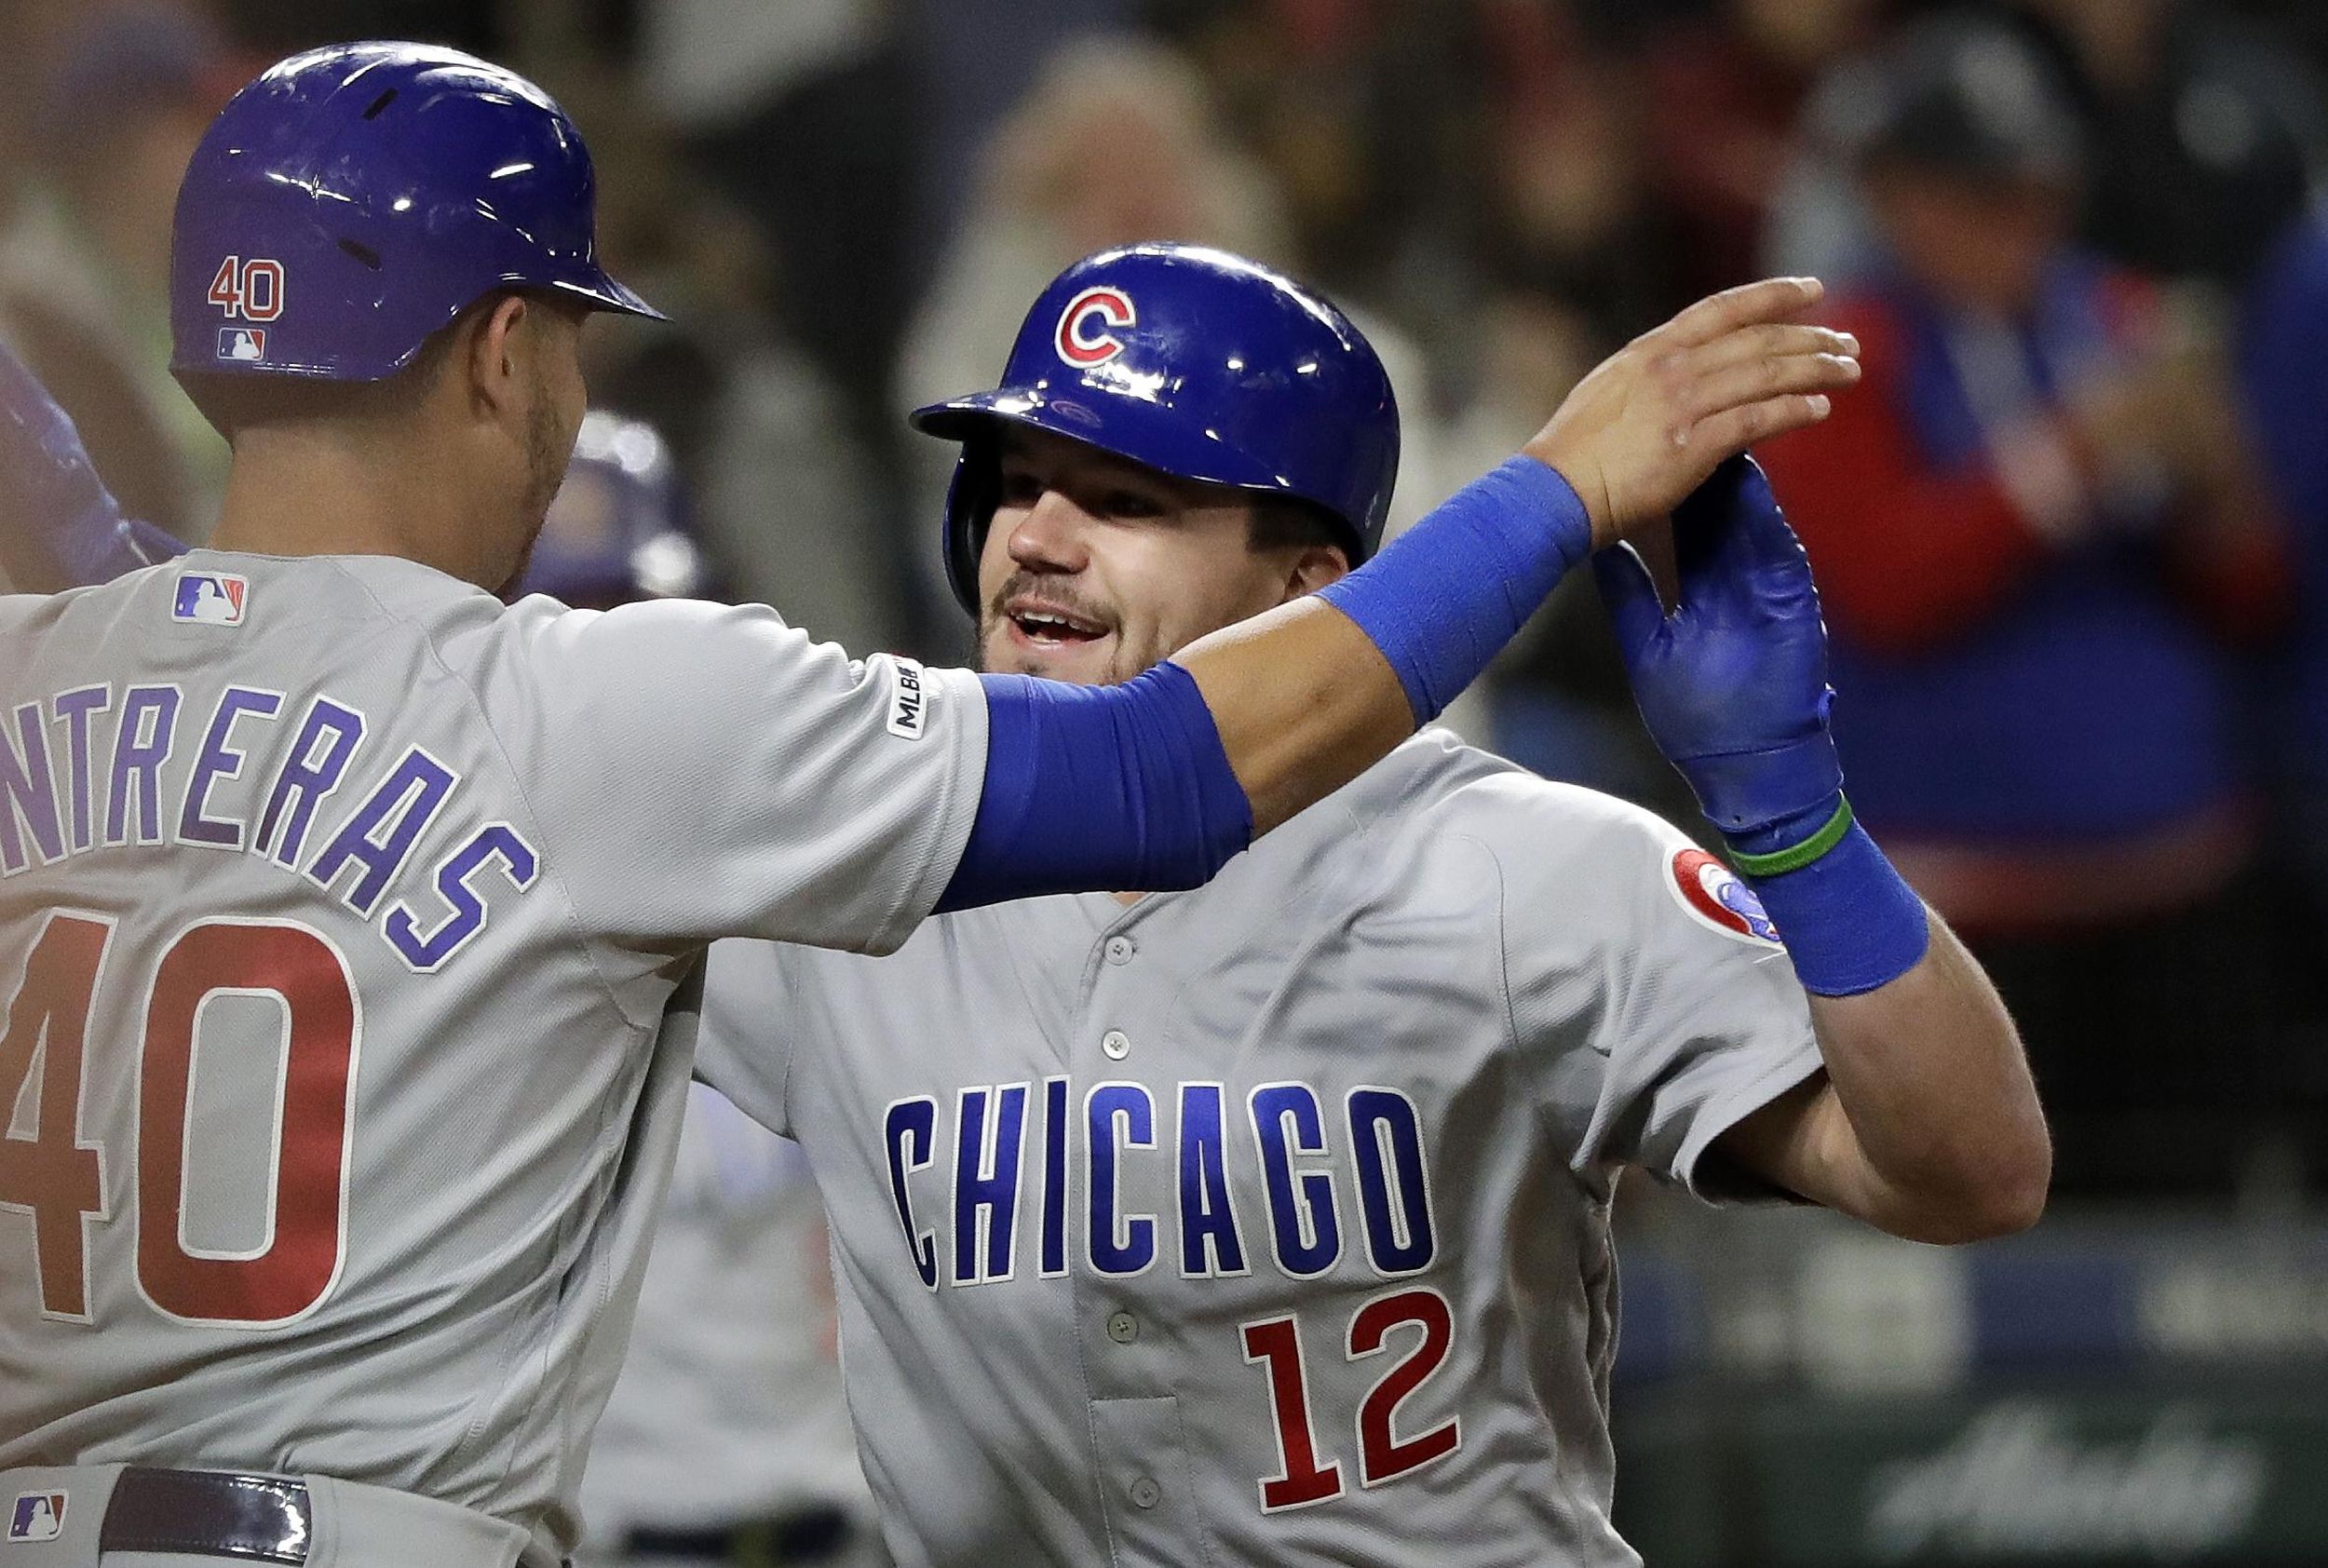 Kyle Schwarber’s homer lifts Cubs to 65 win over Mariners The